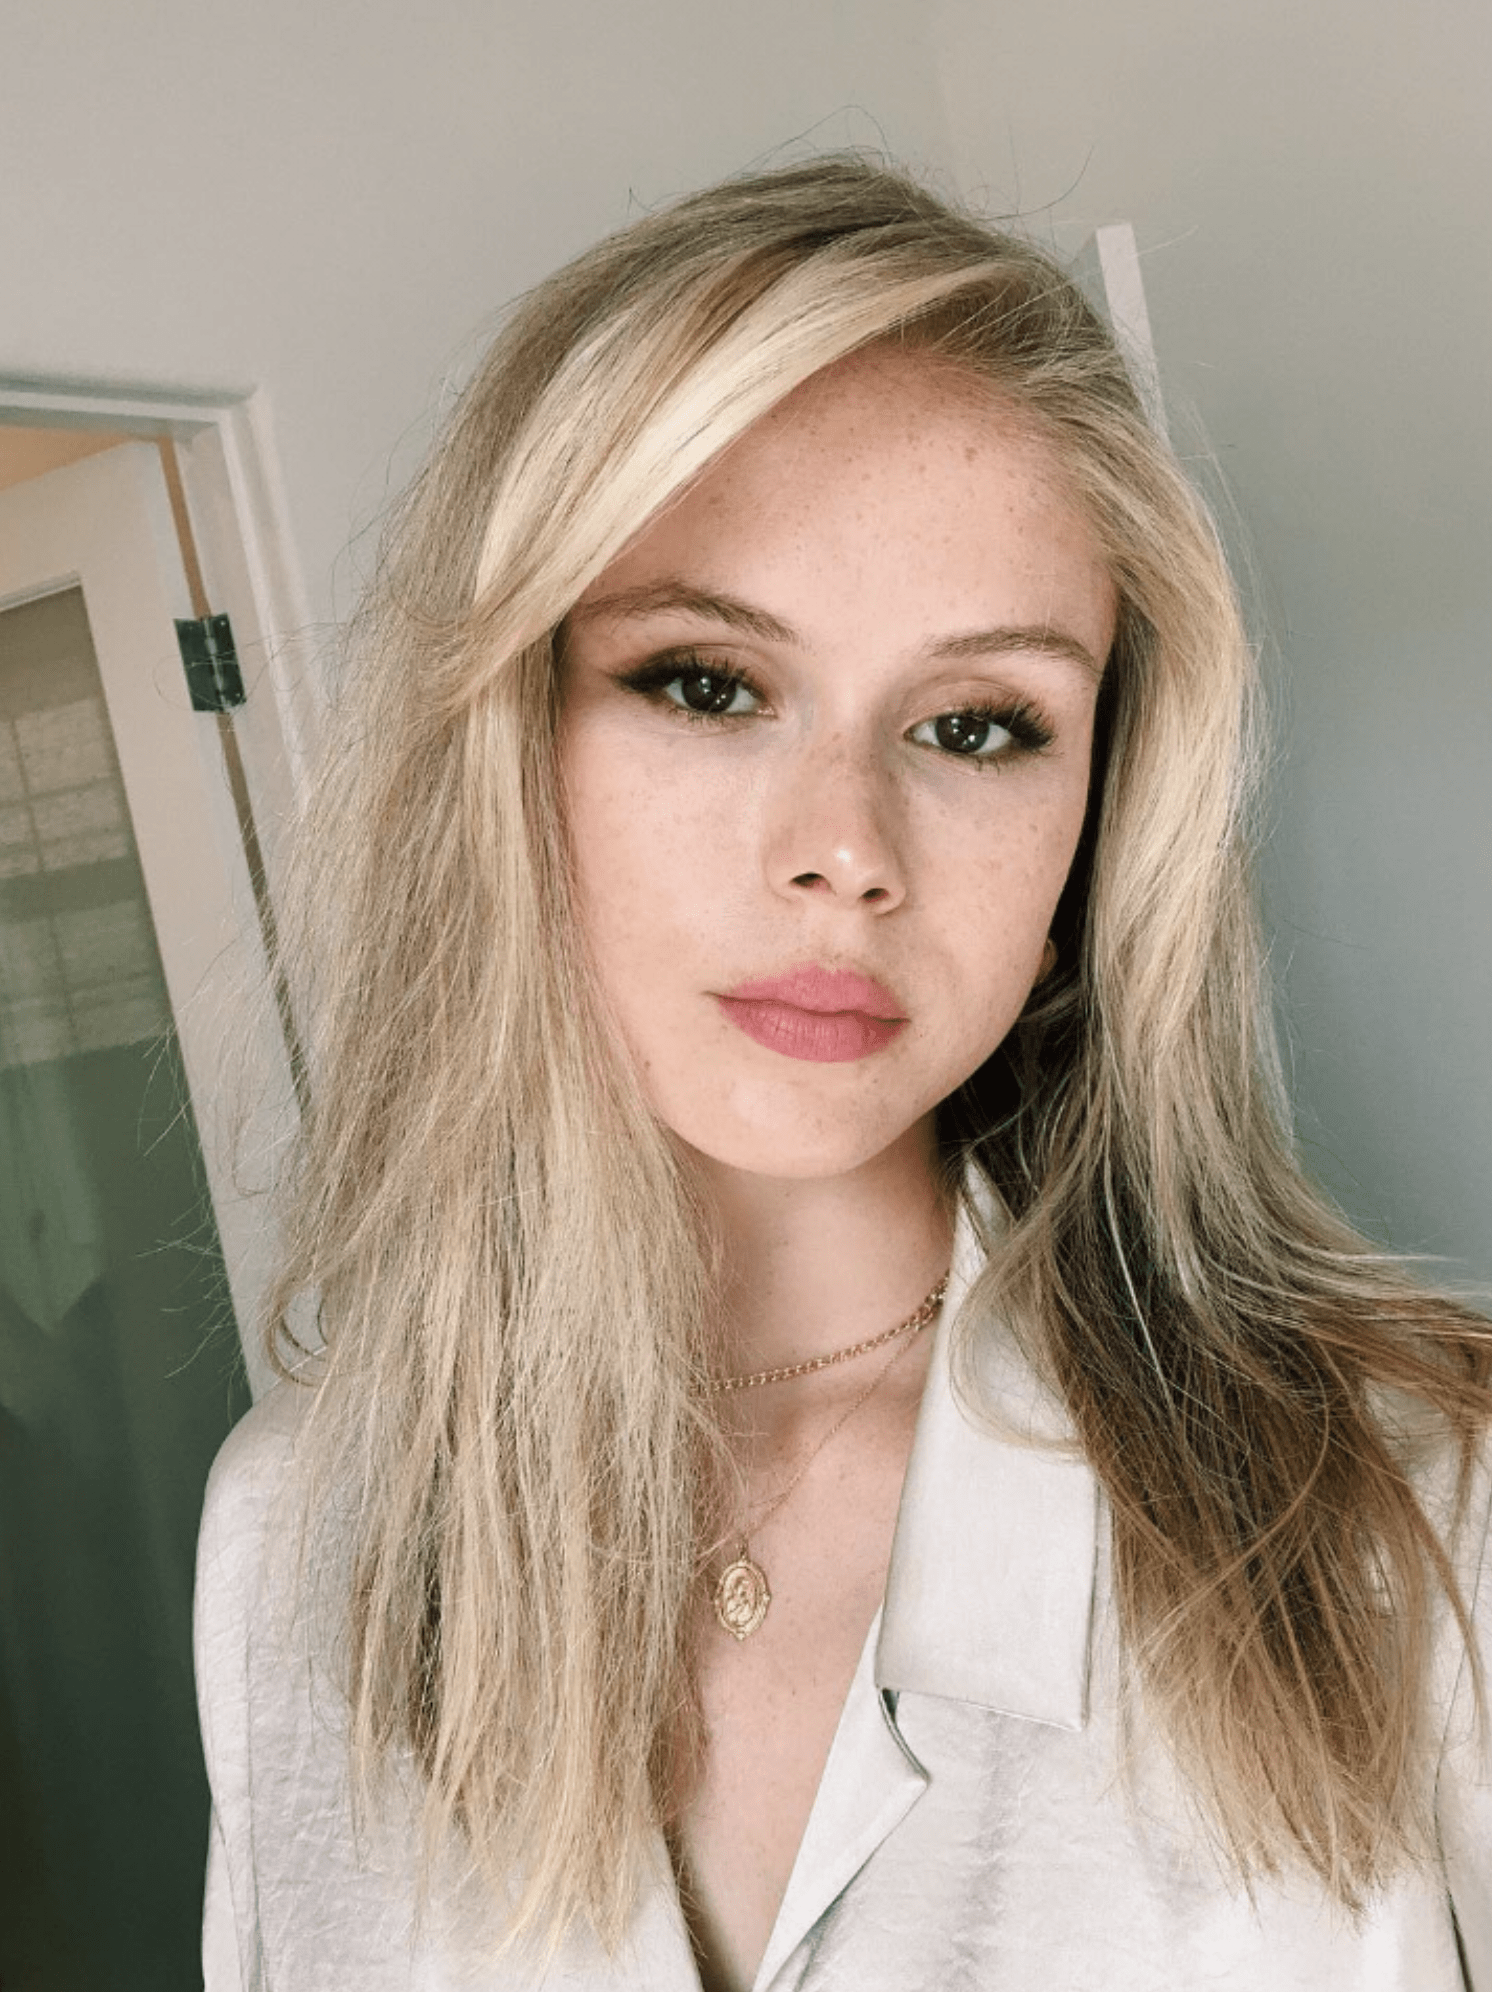 Erin Moriarty is definitely facefuck material